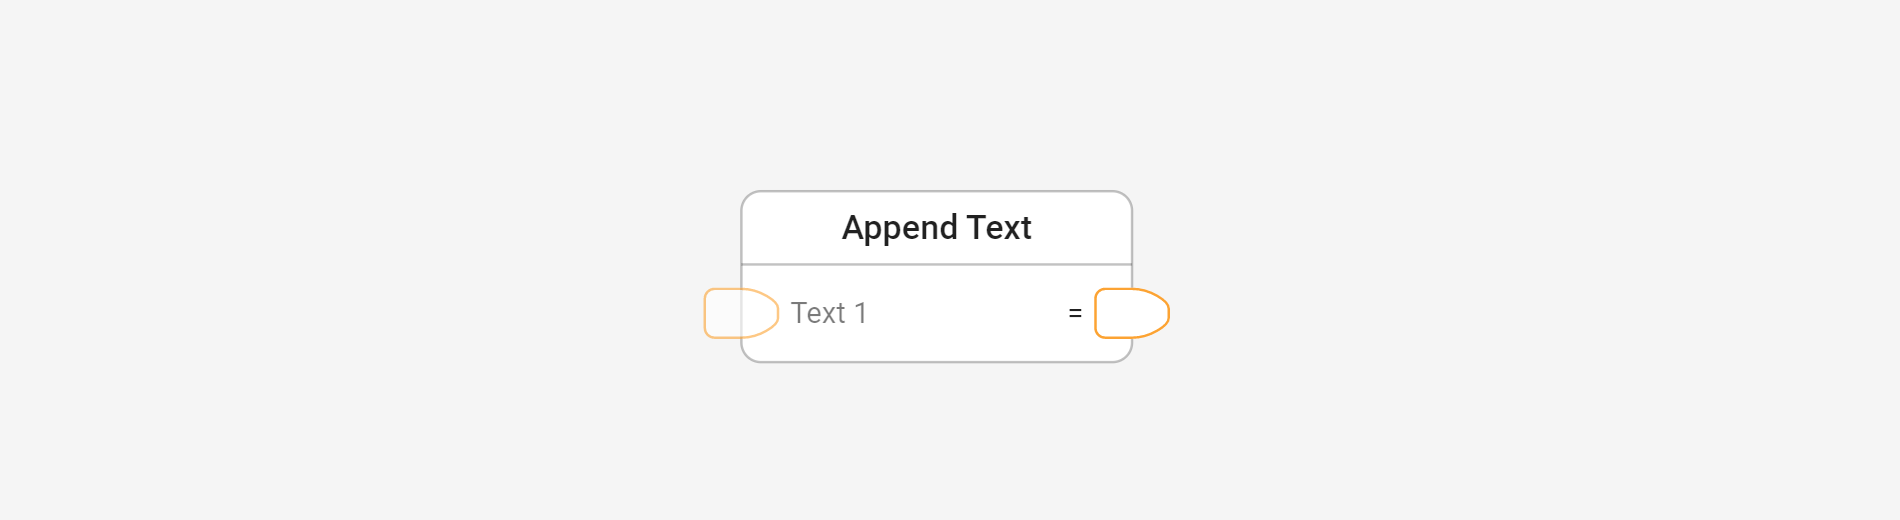 Append text in Centrldesk